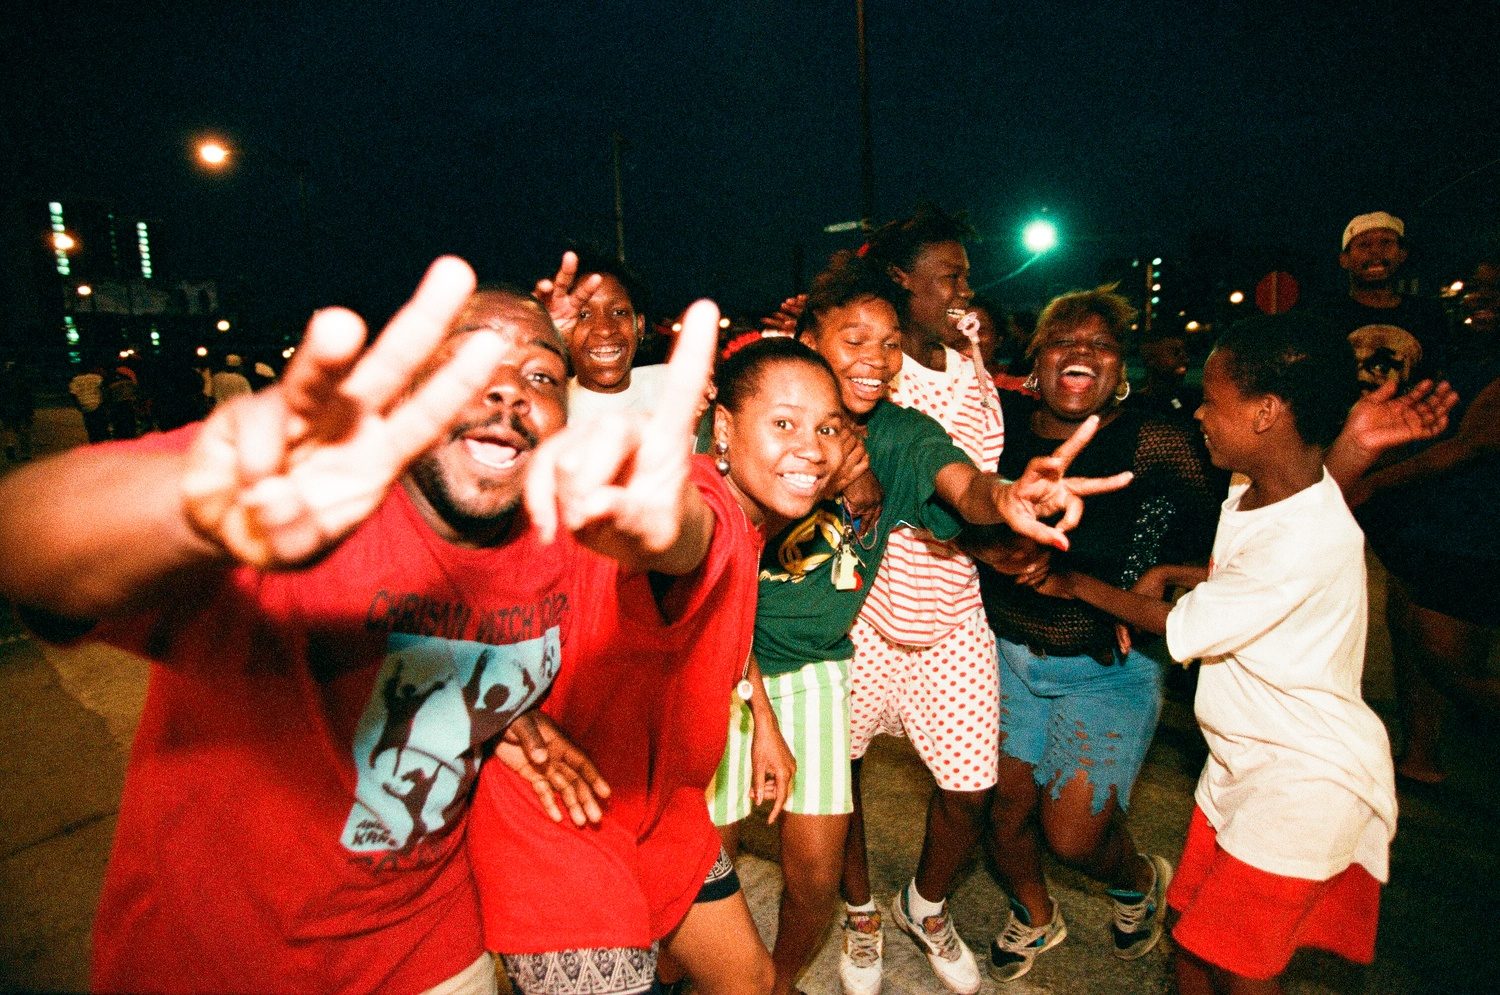 Color photograph of fans celebrating in the street. The closest fan to the camera is a Black man in a red t-shirt holding up three fingers to celebrate the three-peat.